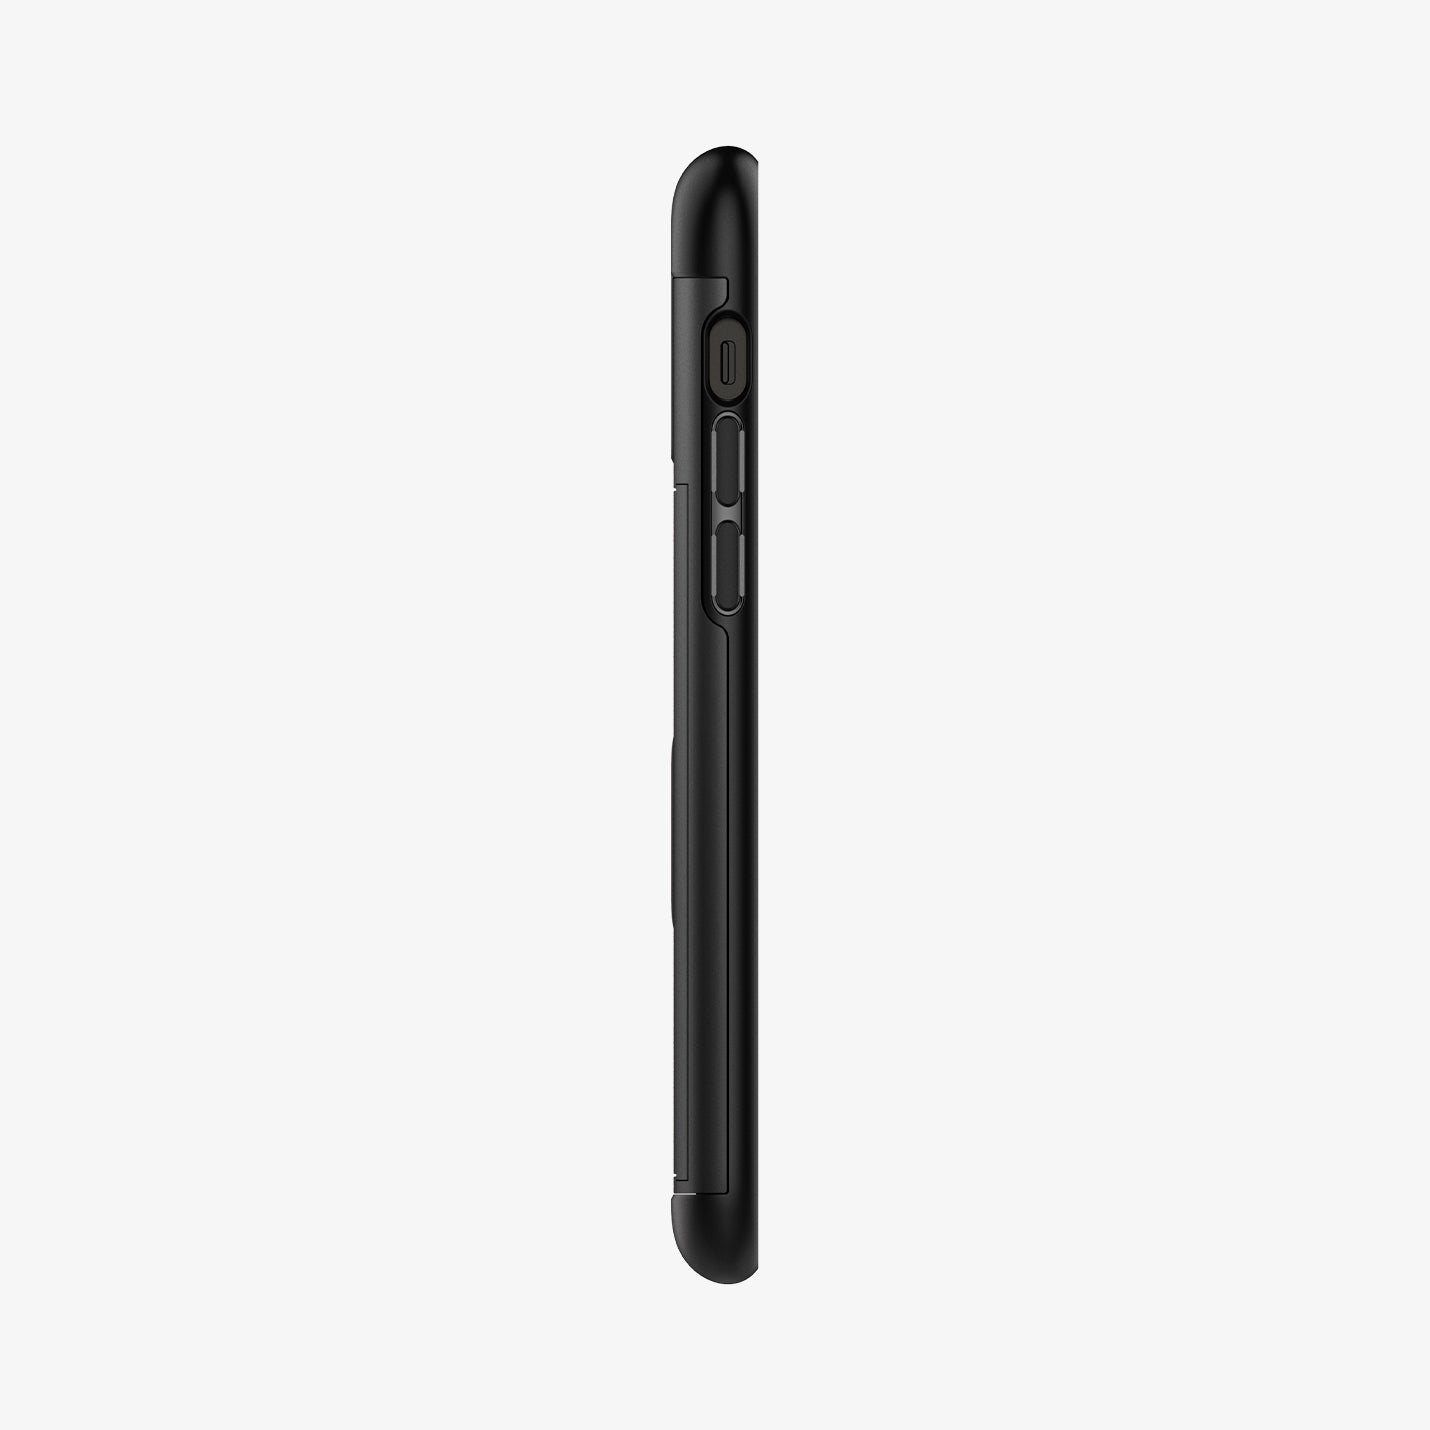 ACS01707 - iPhone 12 / iPhone 12 Pro Case Slim Armor CS in black showing the side with volume controls